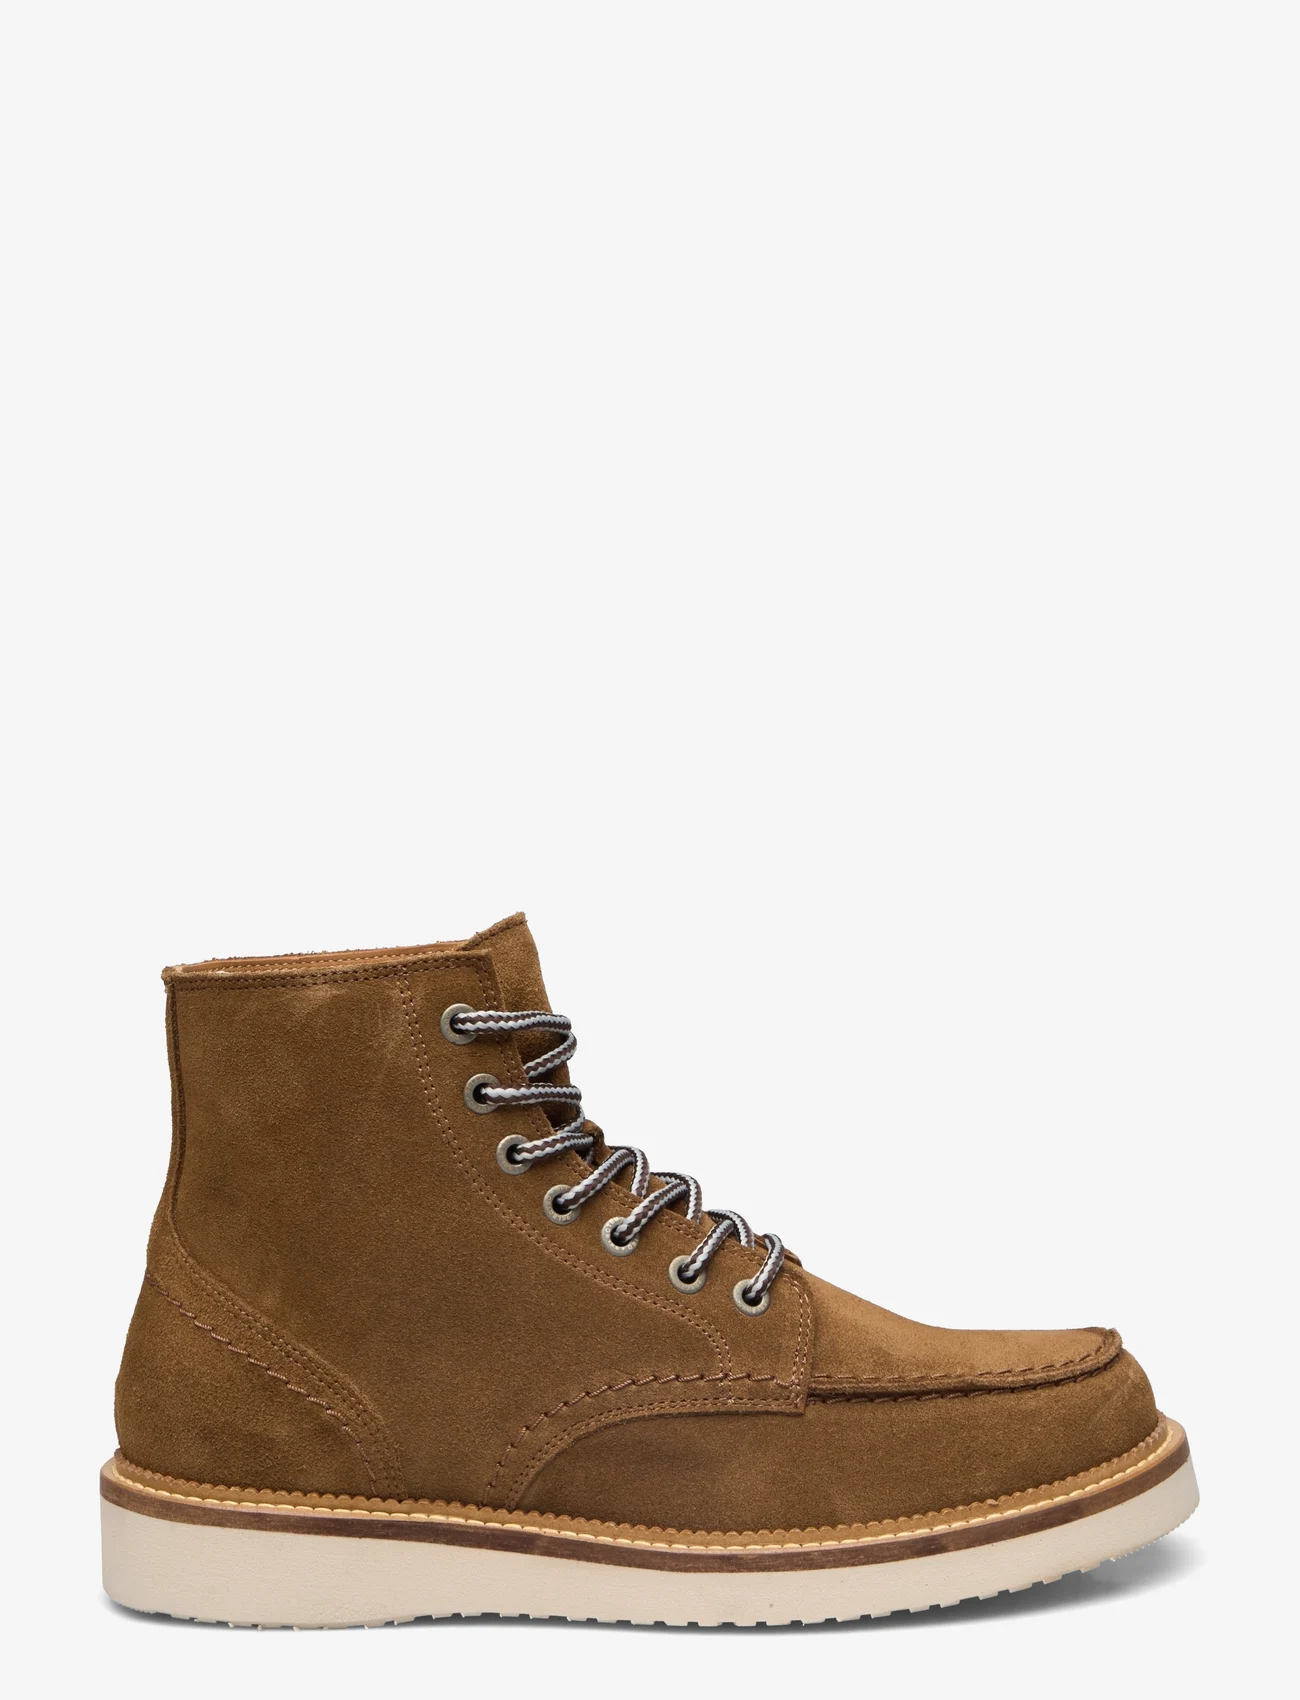 Selected Homme - SLHTEO NEW SUEDE MOC-TOE BOOT B - schnürschuhe - tobacco brown - 1